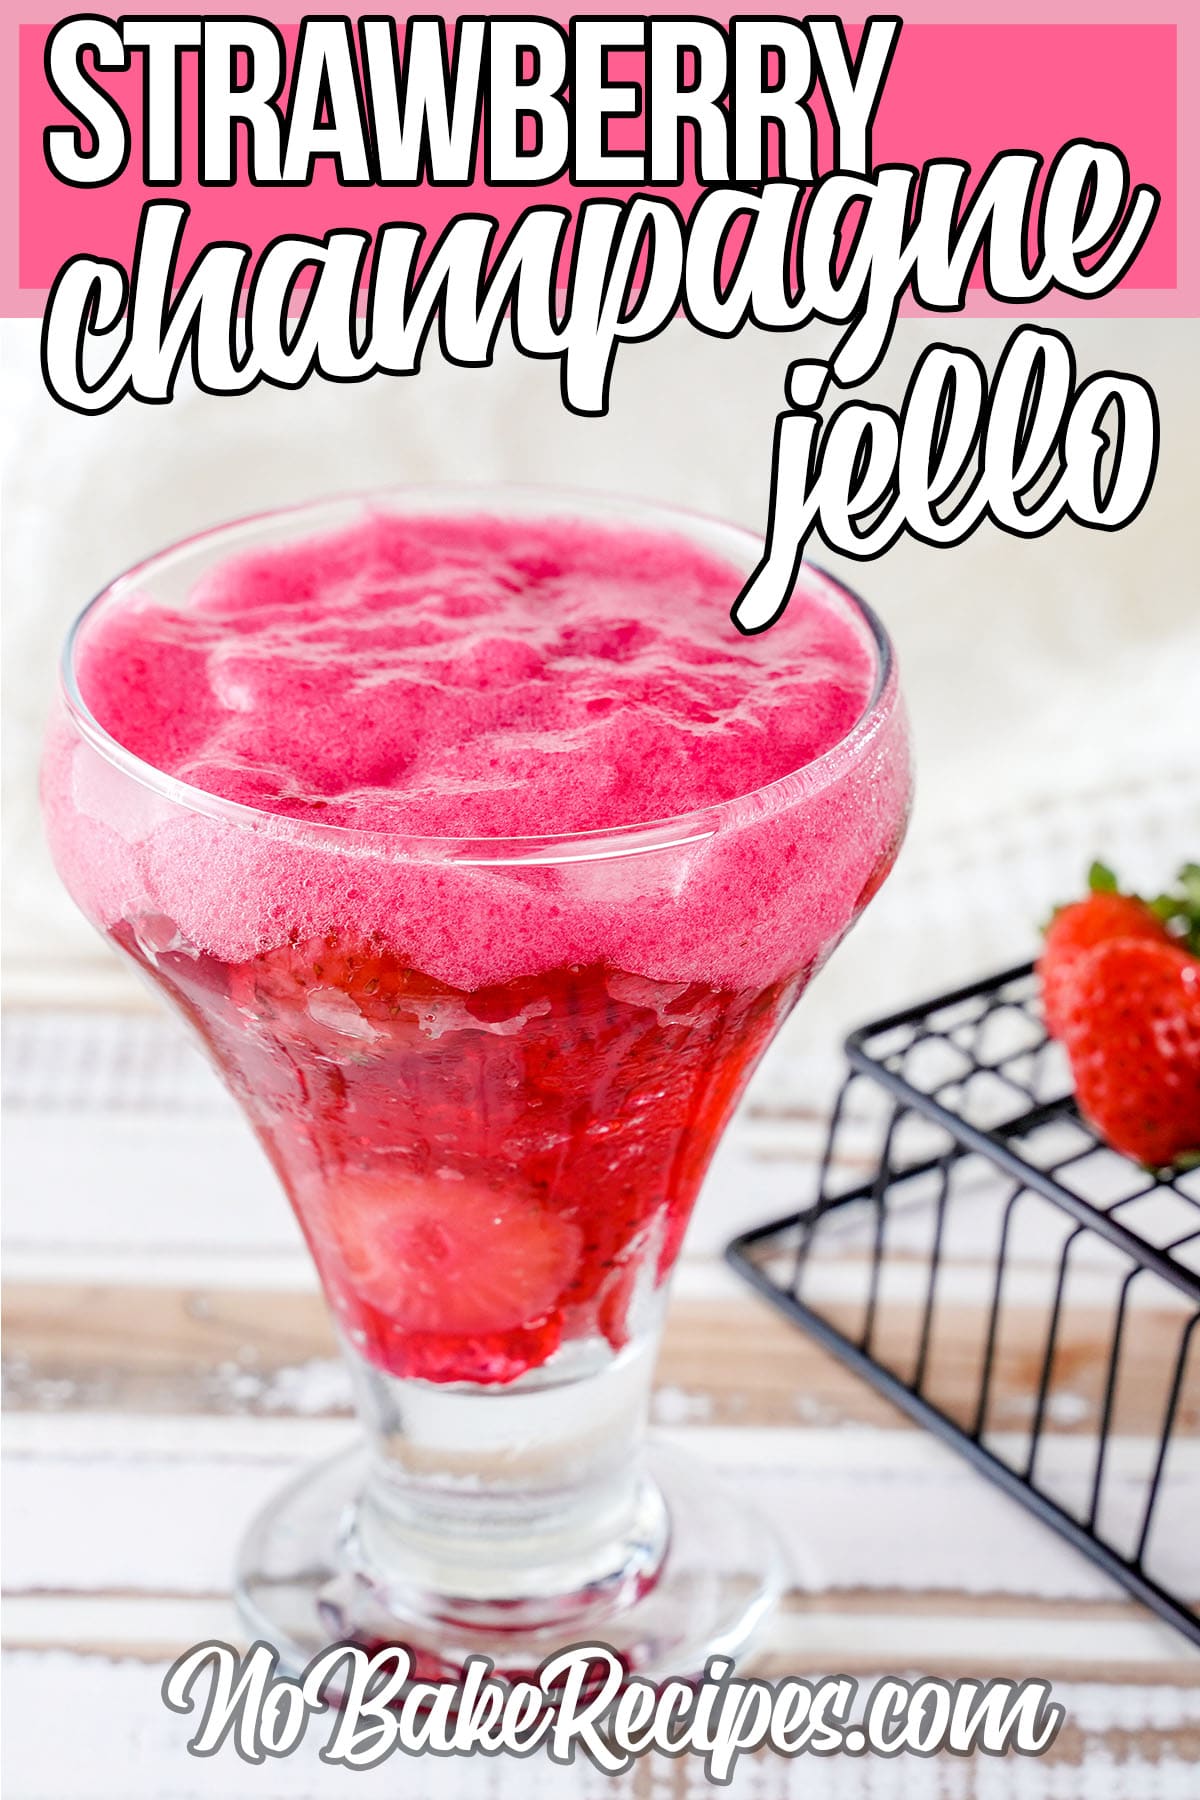 glass of strawberry jello champagne with text which reads strawberry champagne jello